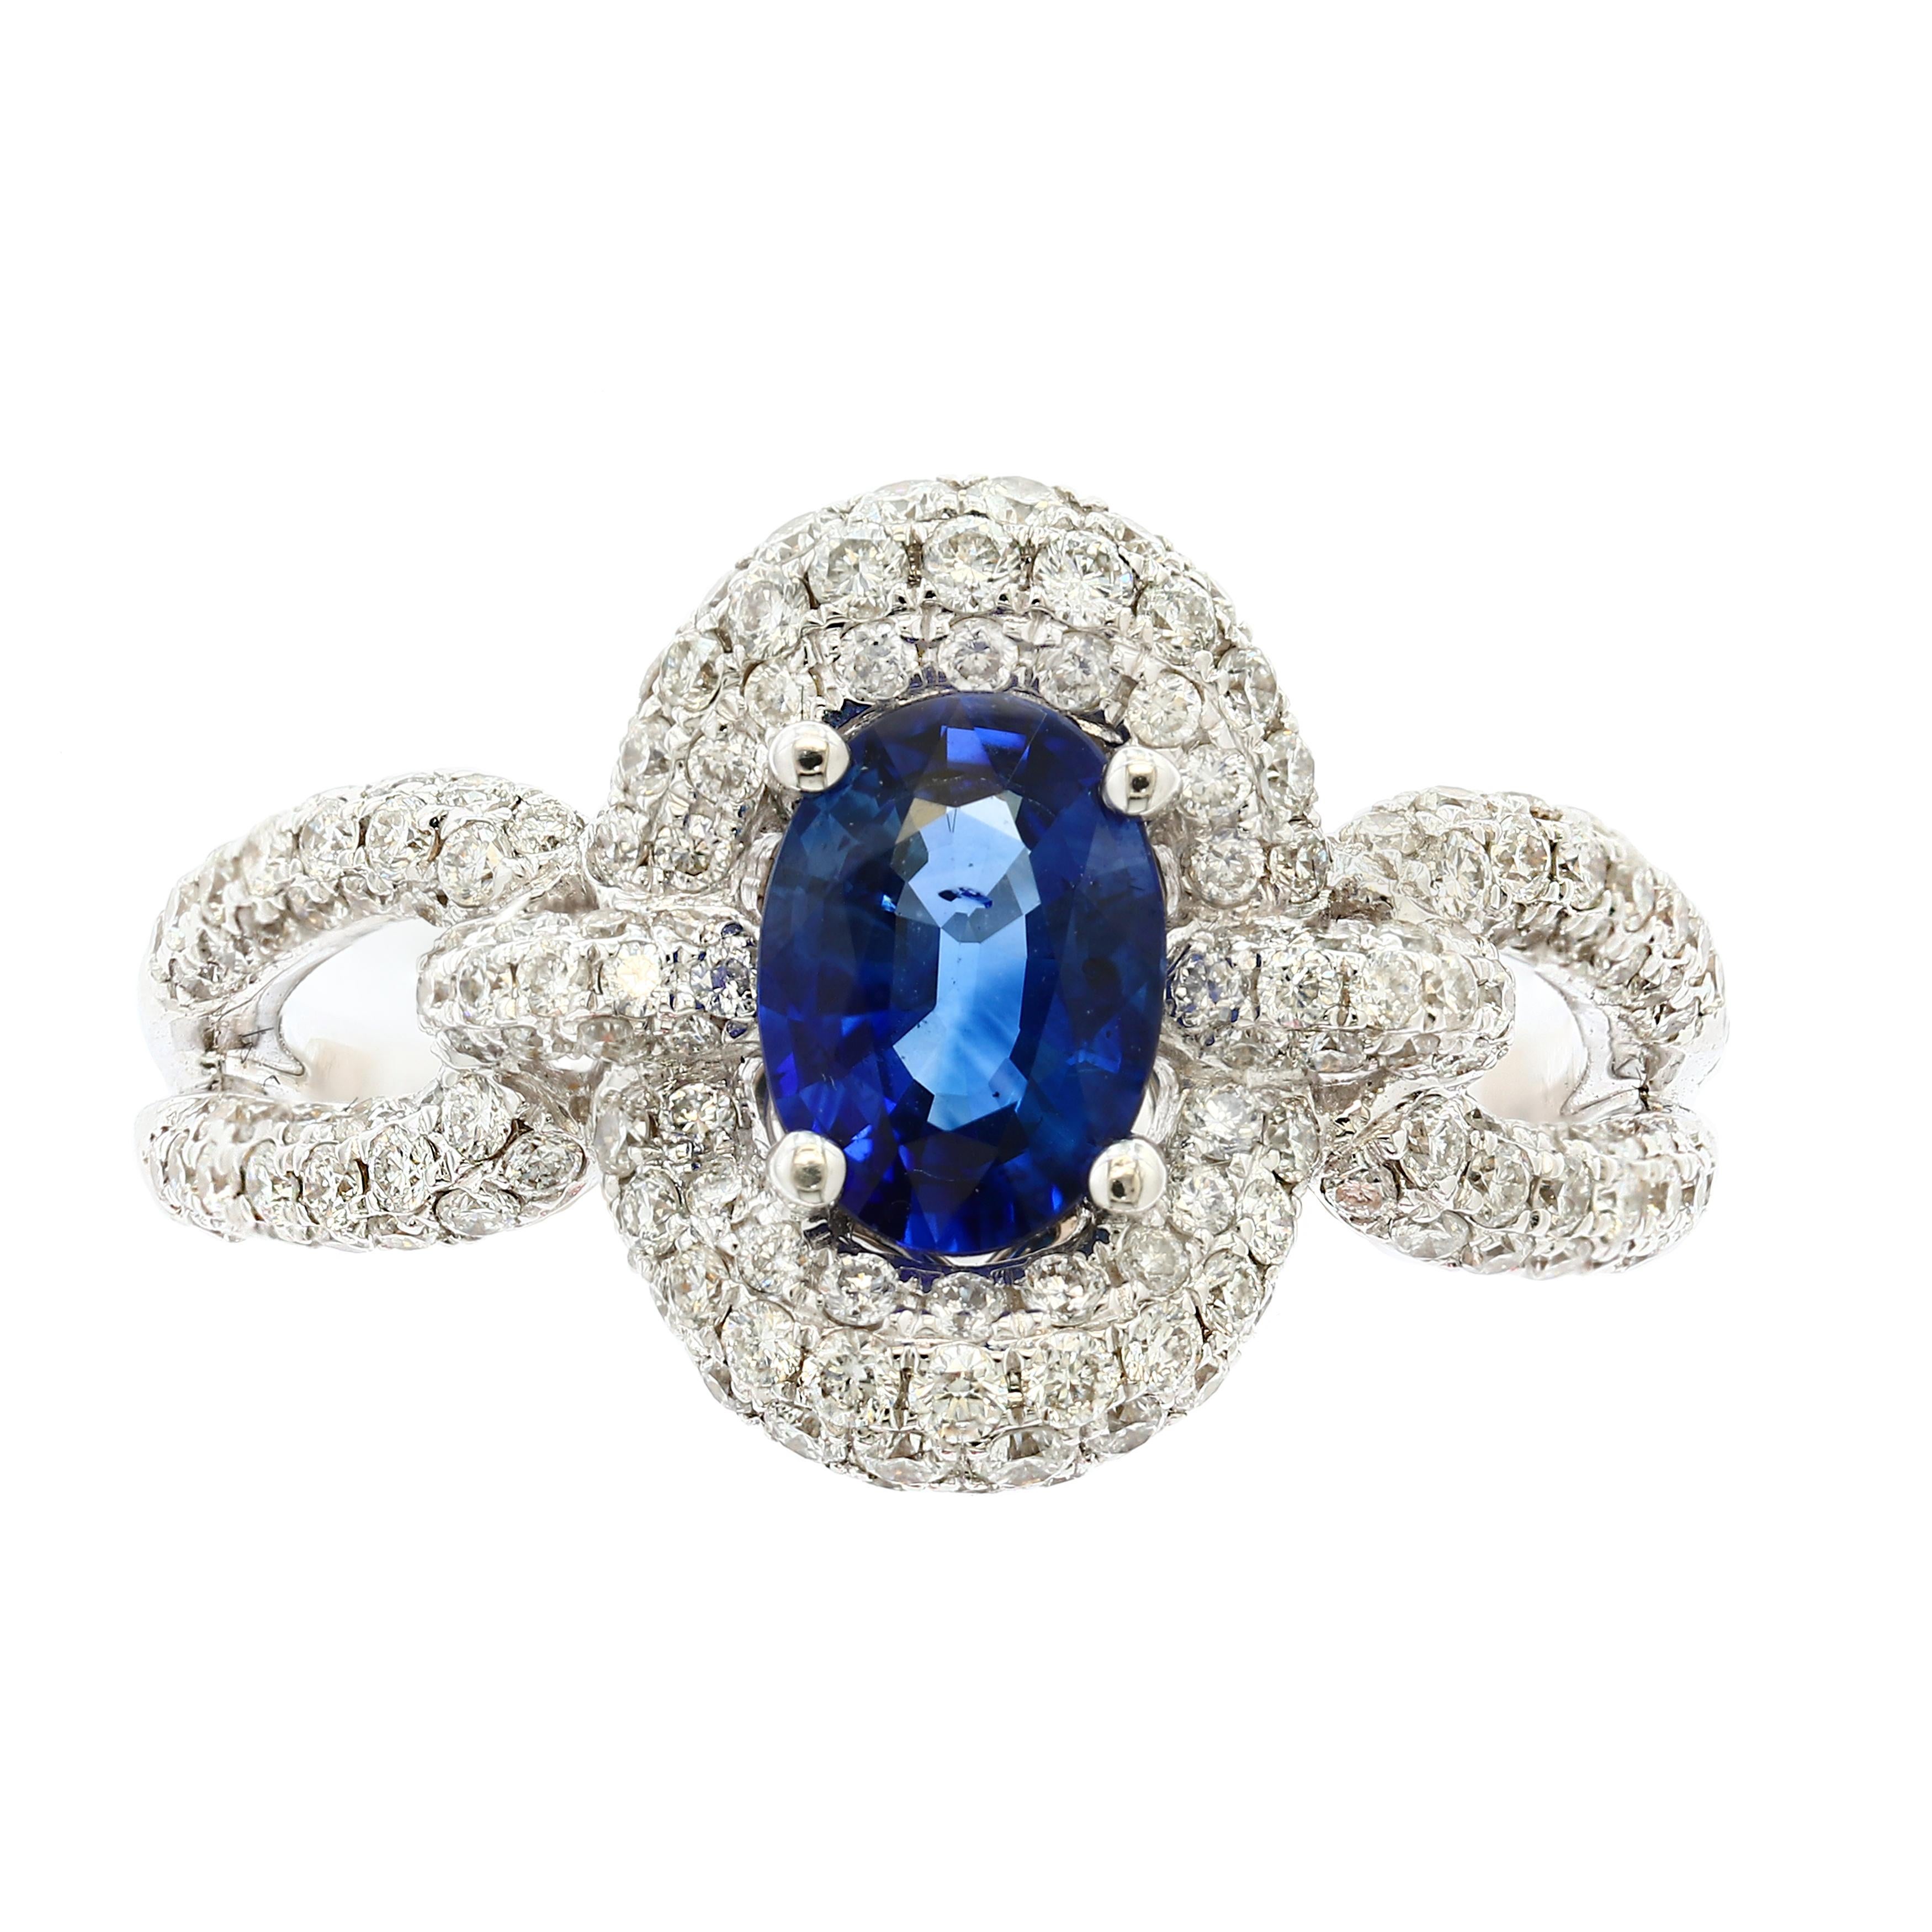 A vibrant 0.94 carat oval cut blue sapphire takes center stage as it elegantly contrasts the sparkling diamonds around it. Set in a chic split shank setting accented with more brilliant diamonds. 
182 Accent diamonds weigh 0.94 carats total. Made in